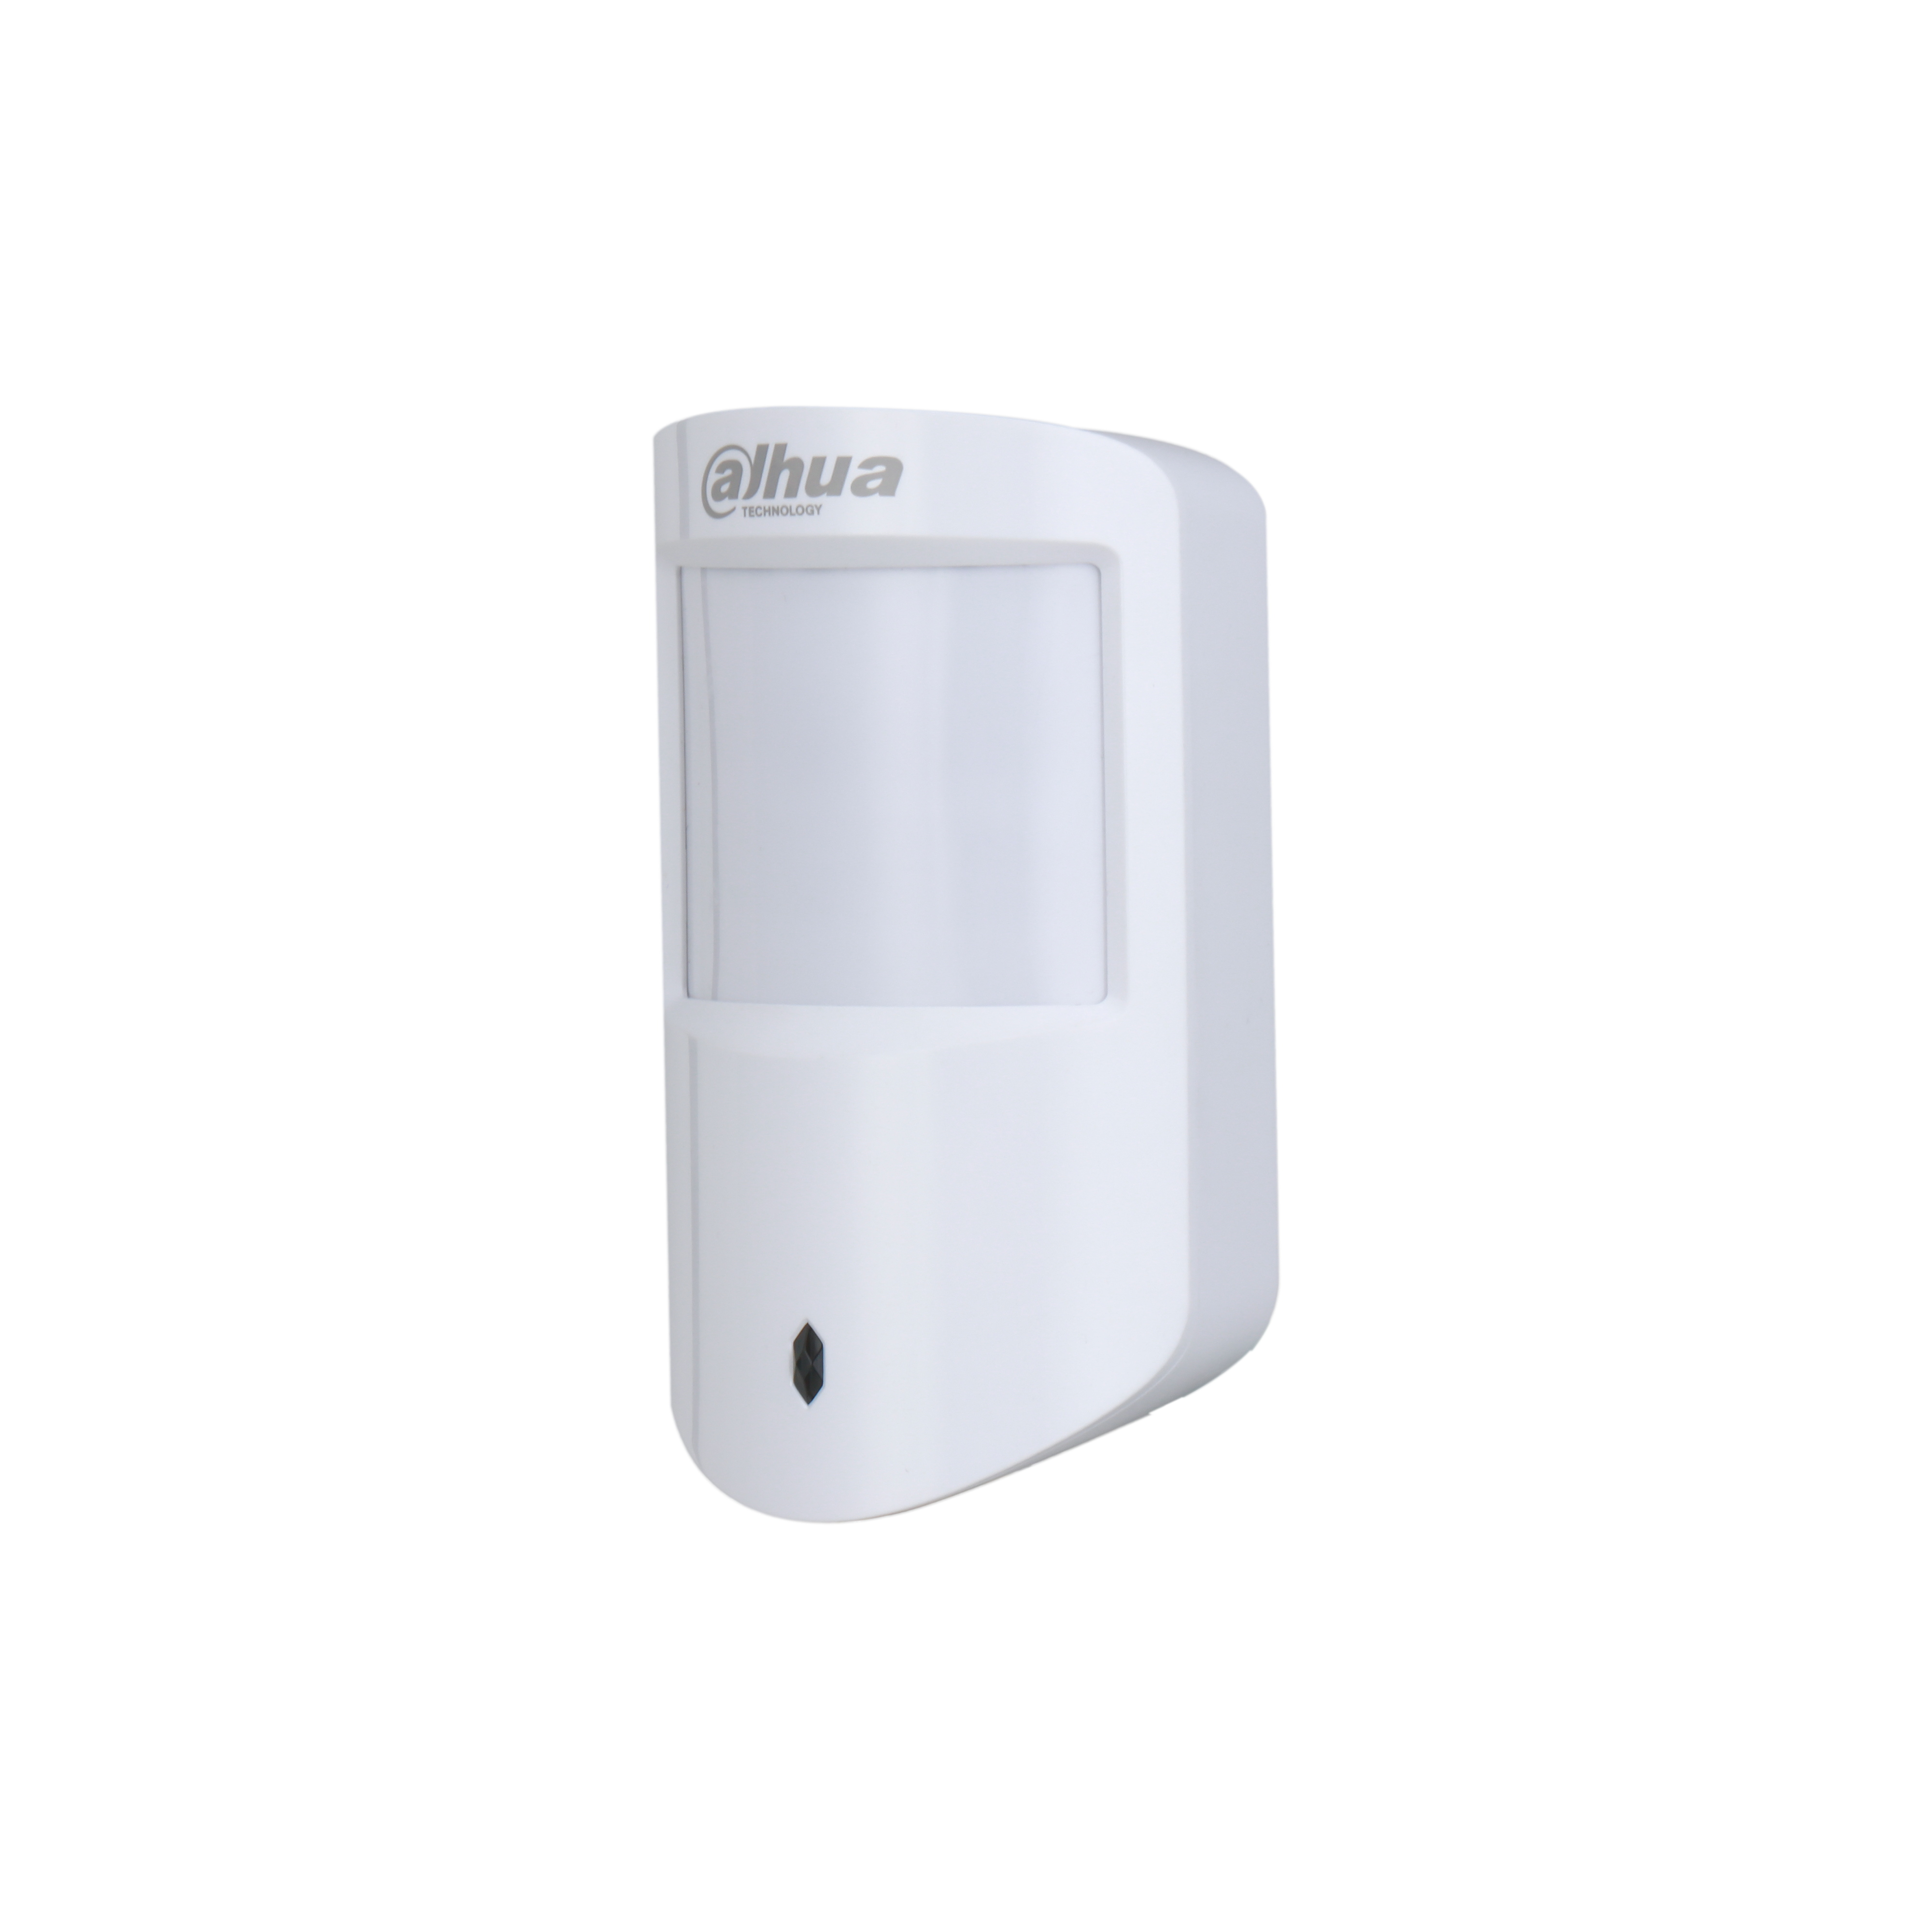 DAHUA WIRELESS PIR DUAL WHITE PET UP TO 18KG 12M DETECTION AREA PLASTIC WALL MOUNT 2.2M MOUNT HEIGHT 433.1-434.6MHz 1xCR123A BATT (3.3V)